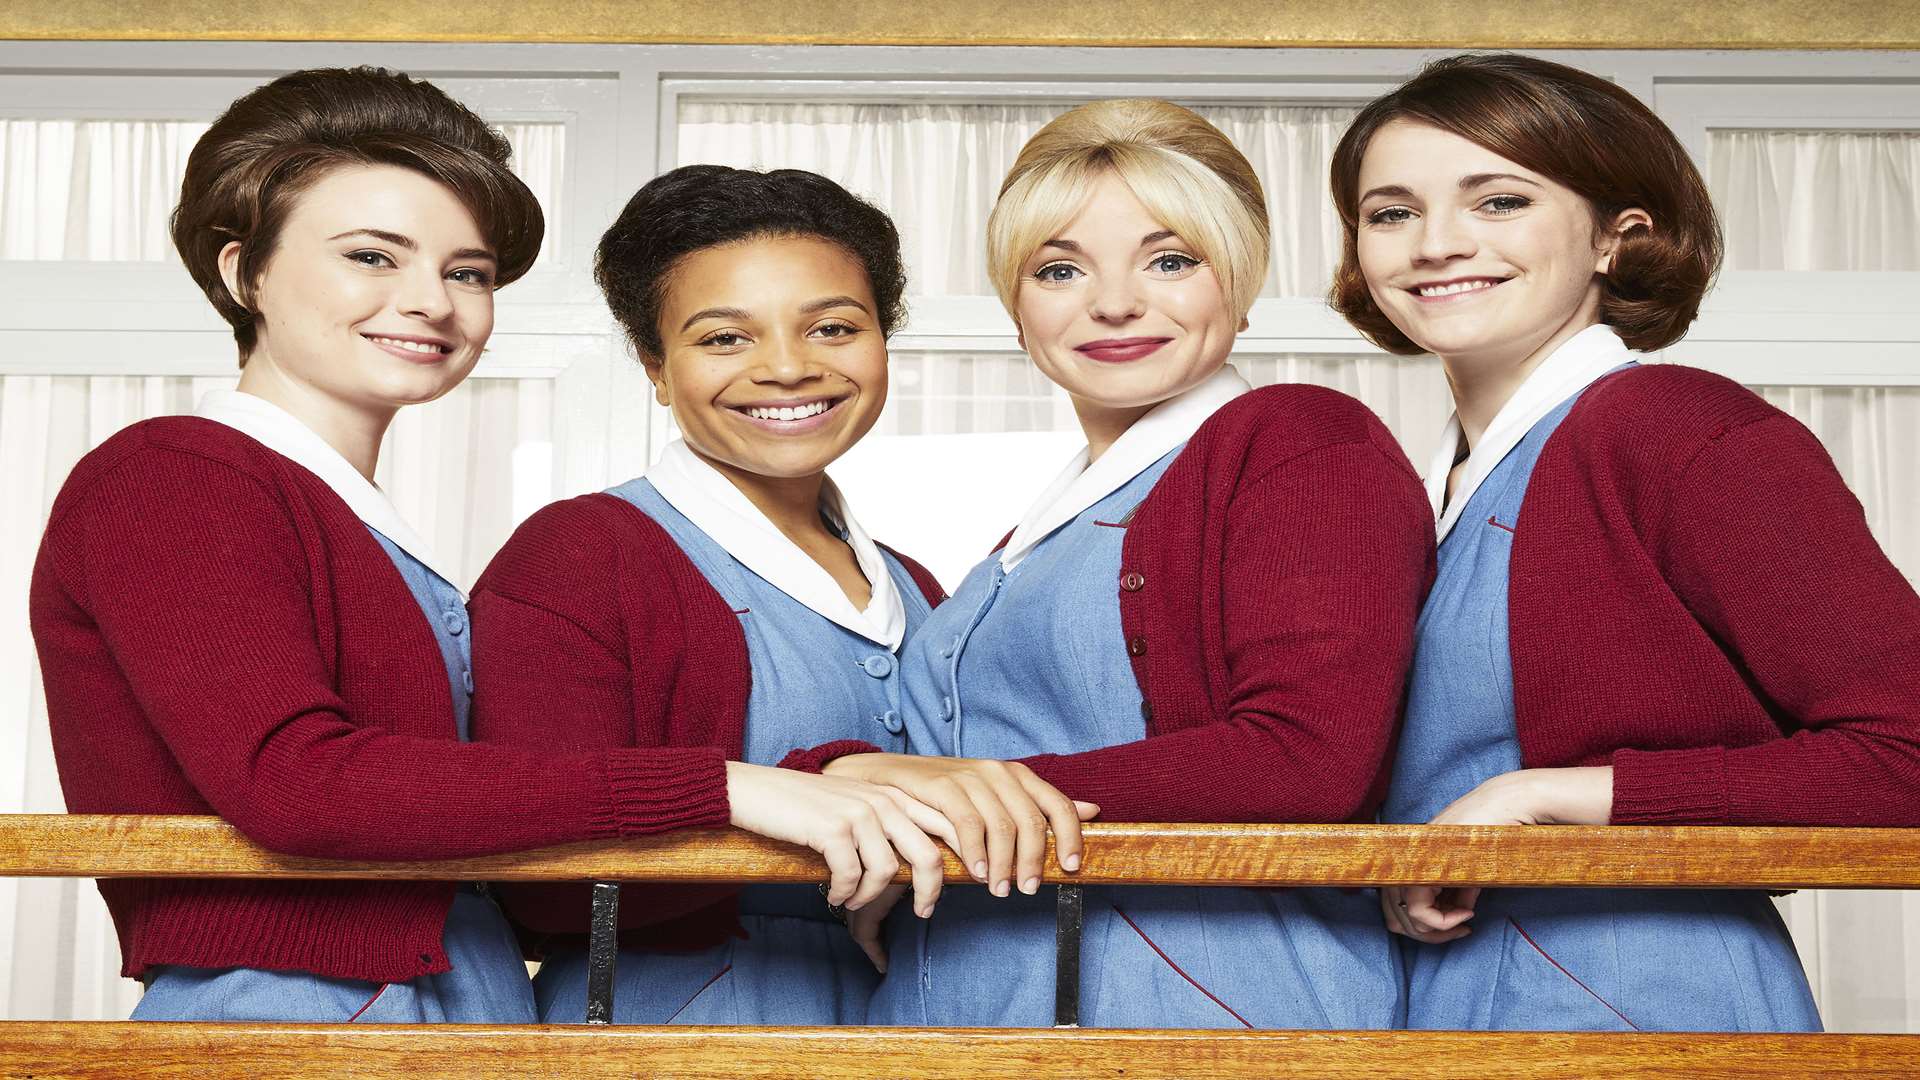 Call the Midwife returns to BBC1 on Sunday, January 21 at 8pm